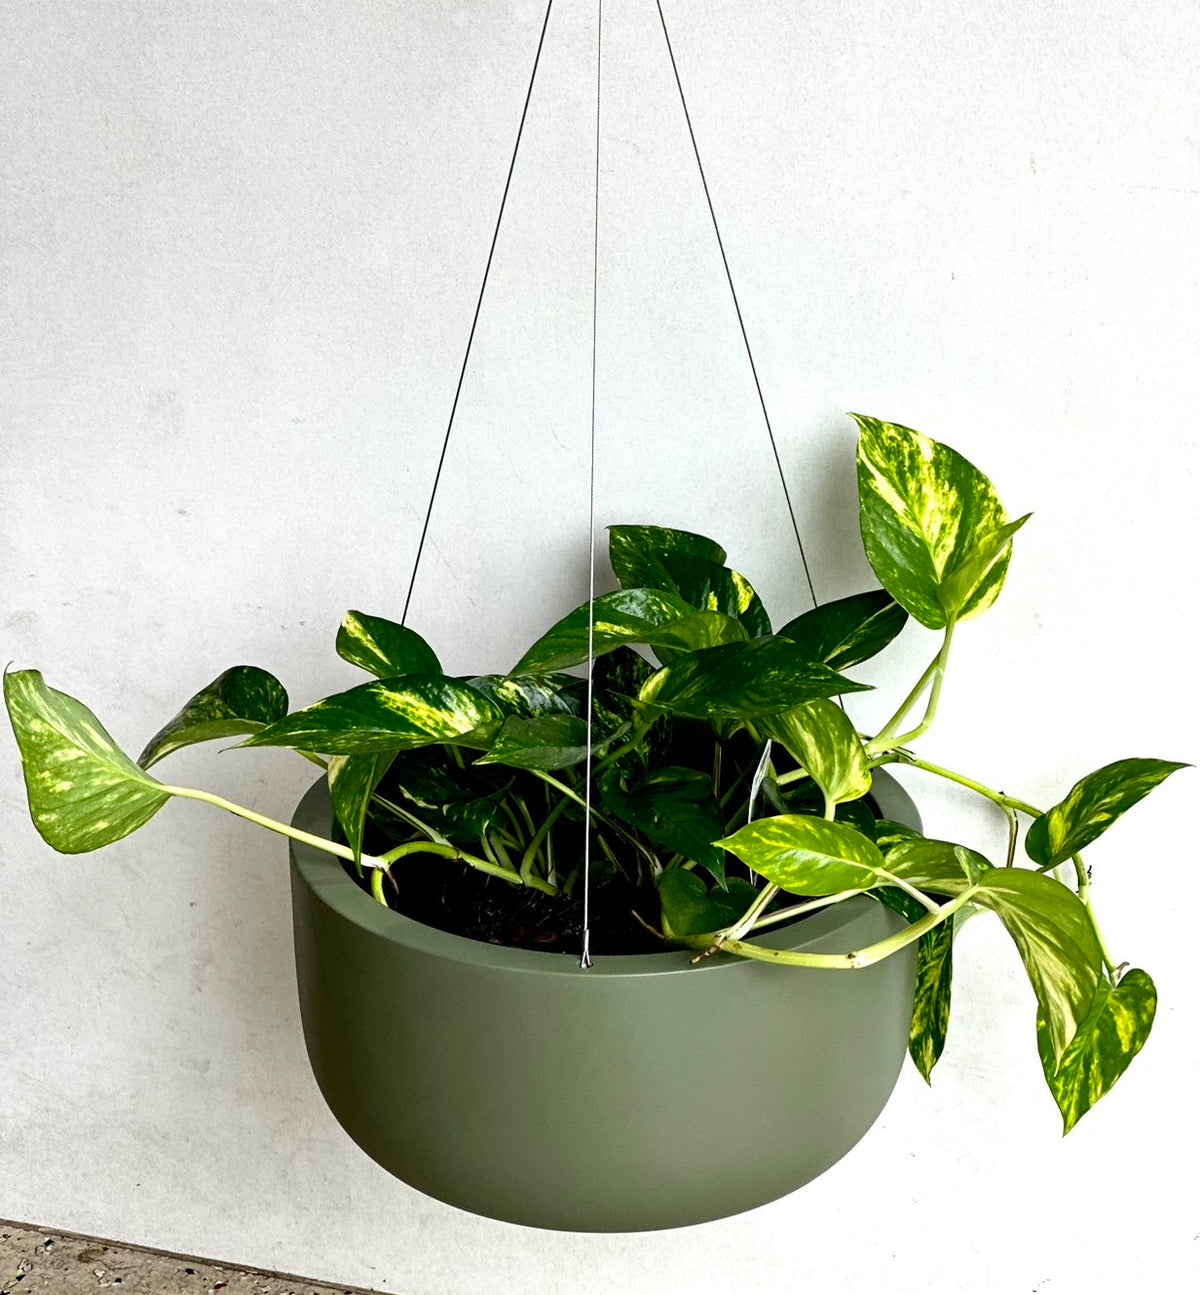 NY Mimi hanger green fit 200mm pot inside (Delivery/Pickup)